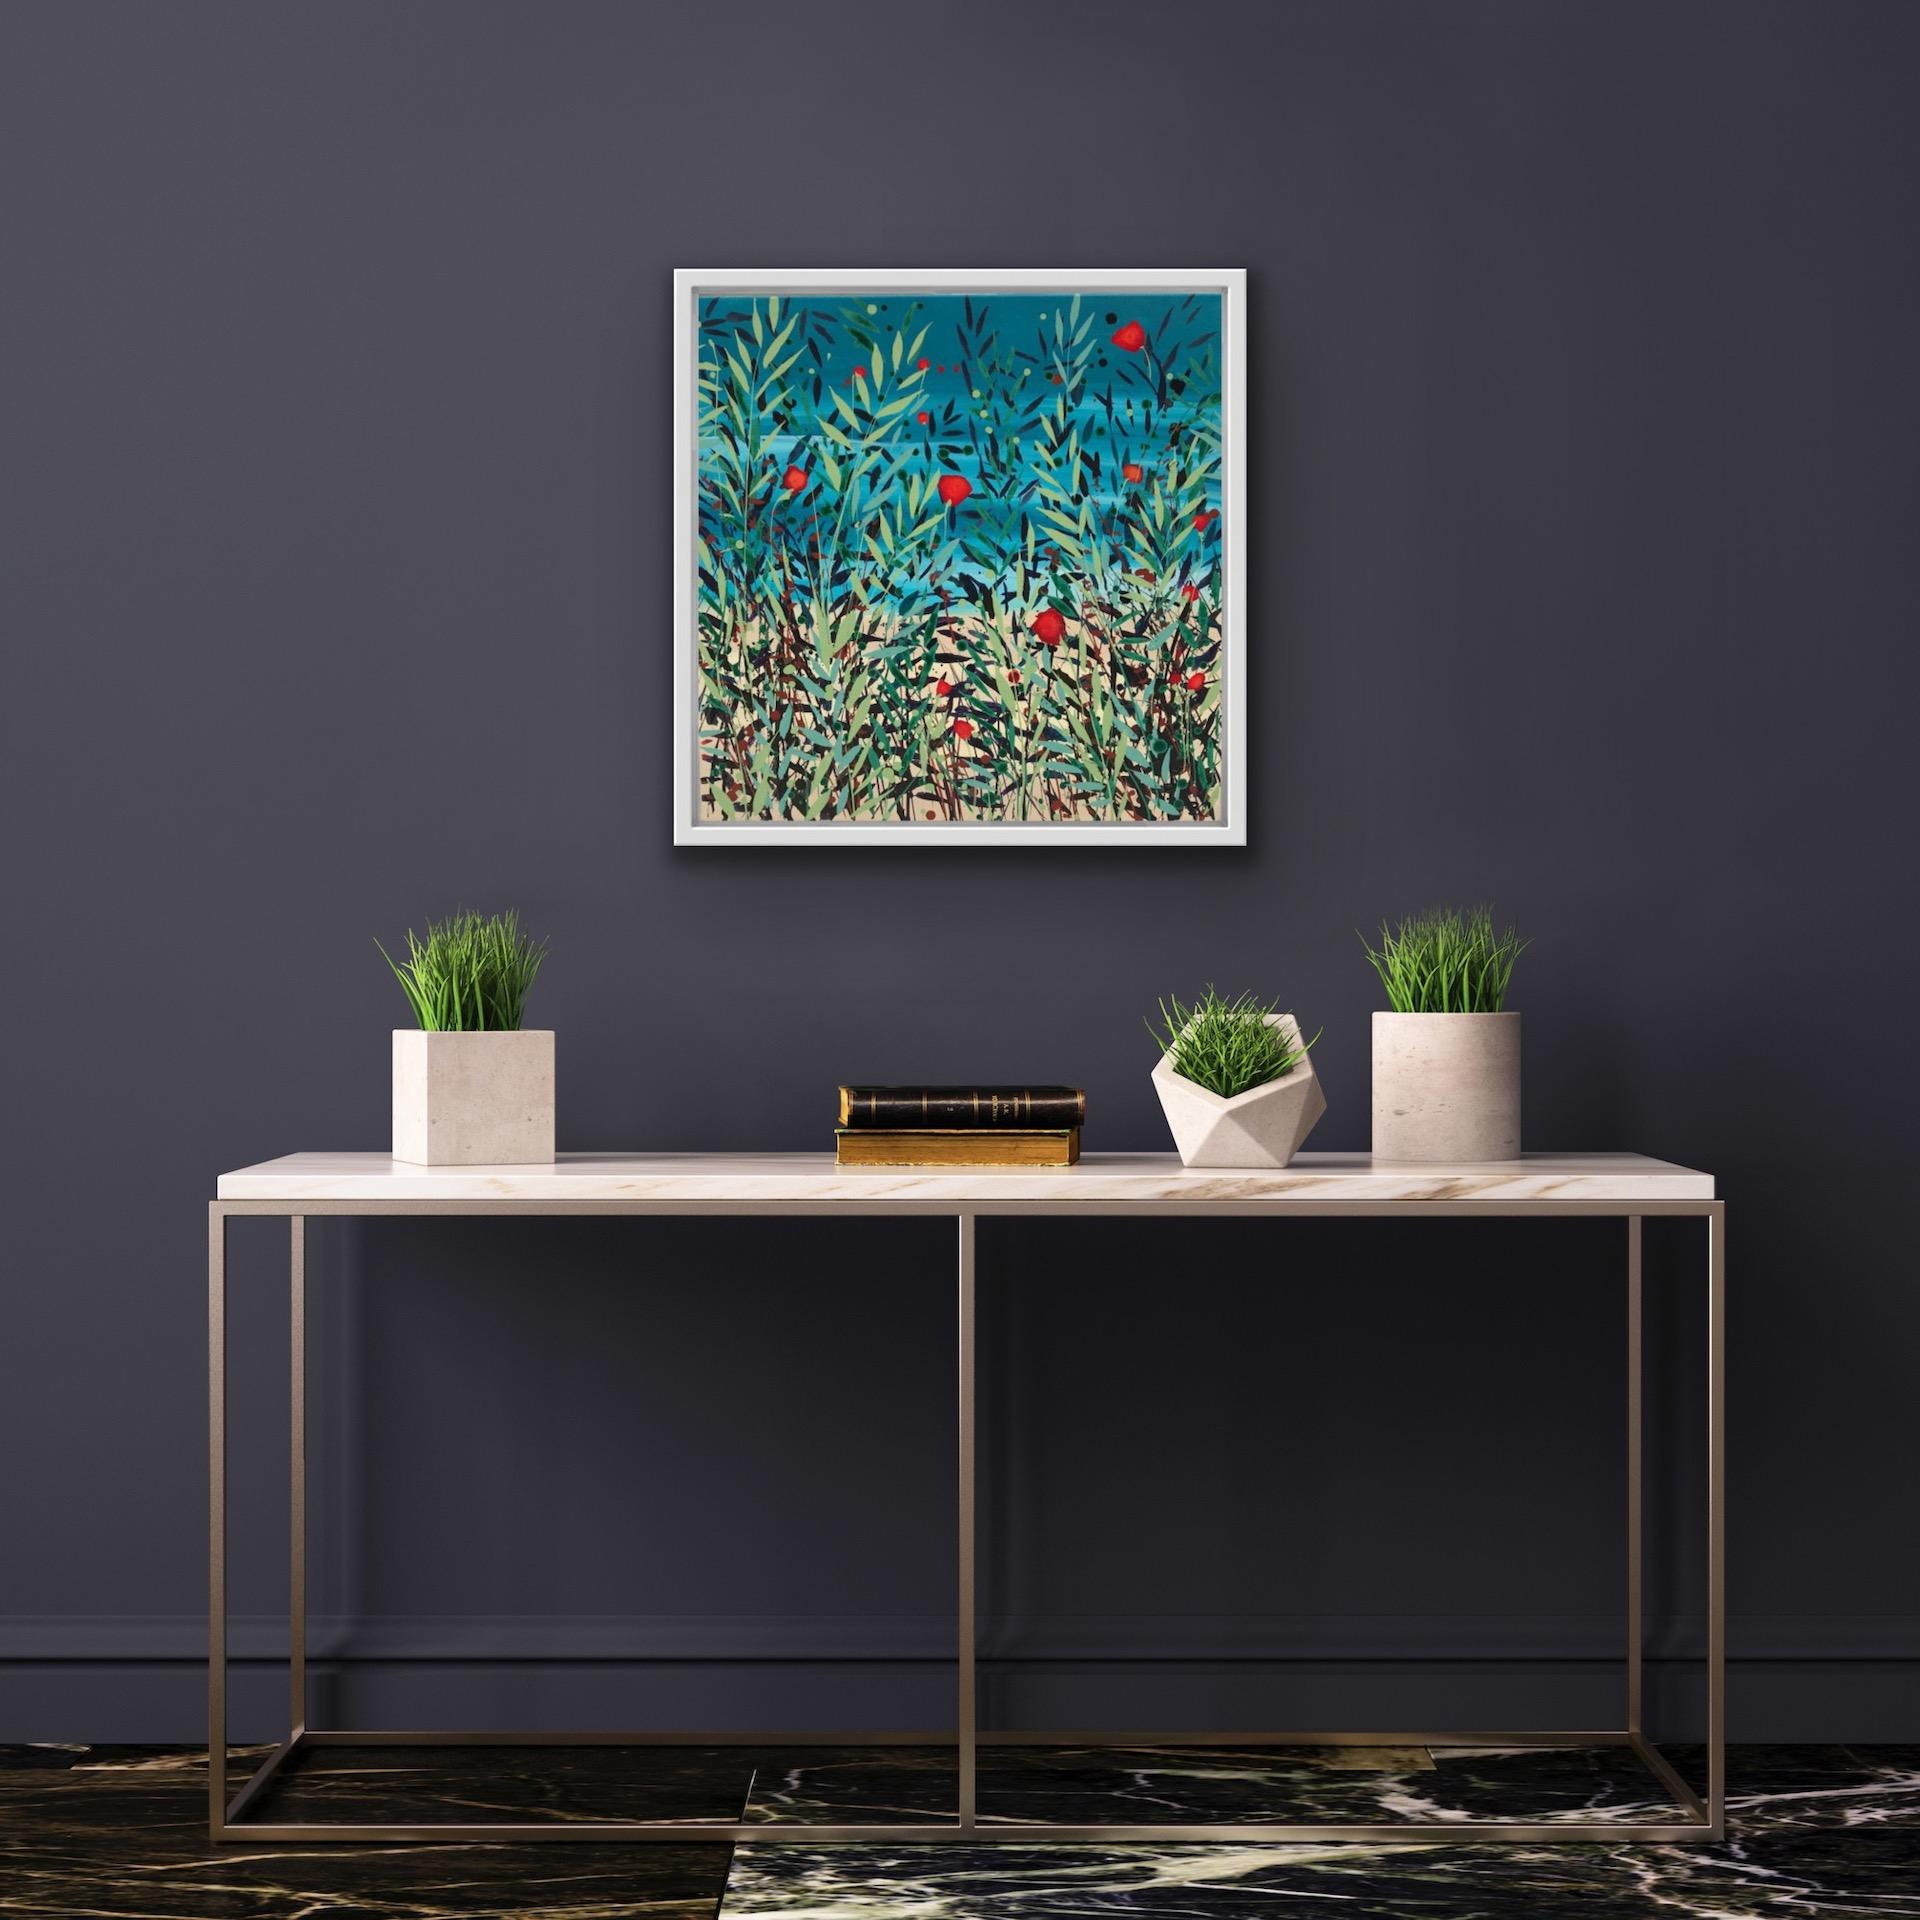 Sea View Poppies and Grasses Cromer [2021]
Original
Landscapes and seascapes
Acrylic paint on canvas
Complete Size of Unframed Work: H:50 cm x W:50 cm x D:2cm
Frame Size: H:54 cm x W:54 cm x D:3.5cm
Sold Framed
Please note that insitu images are